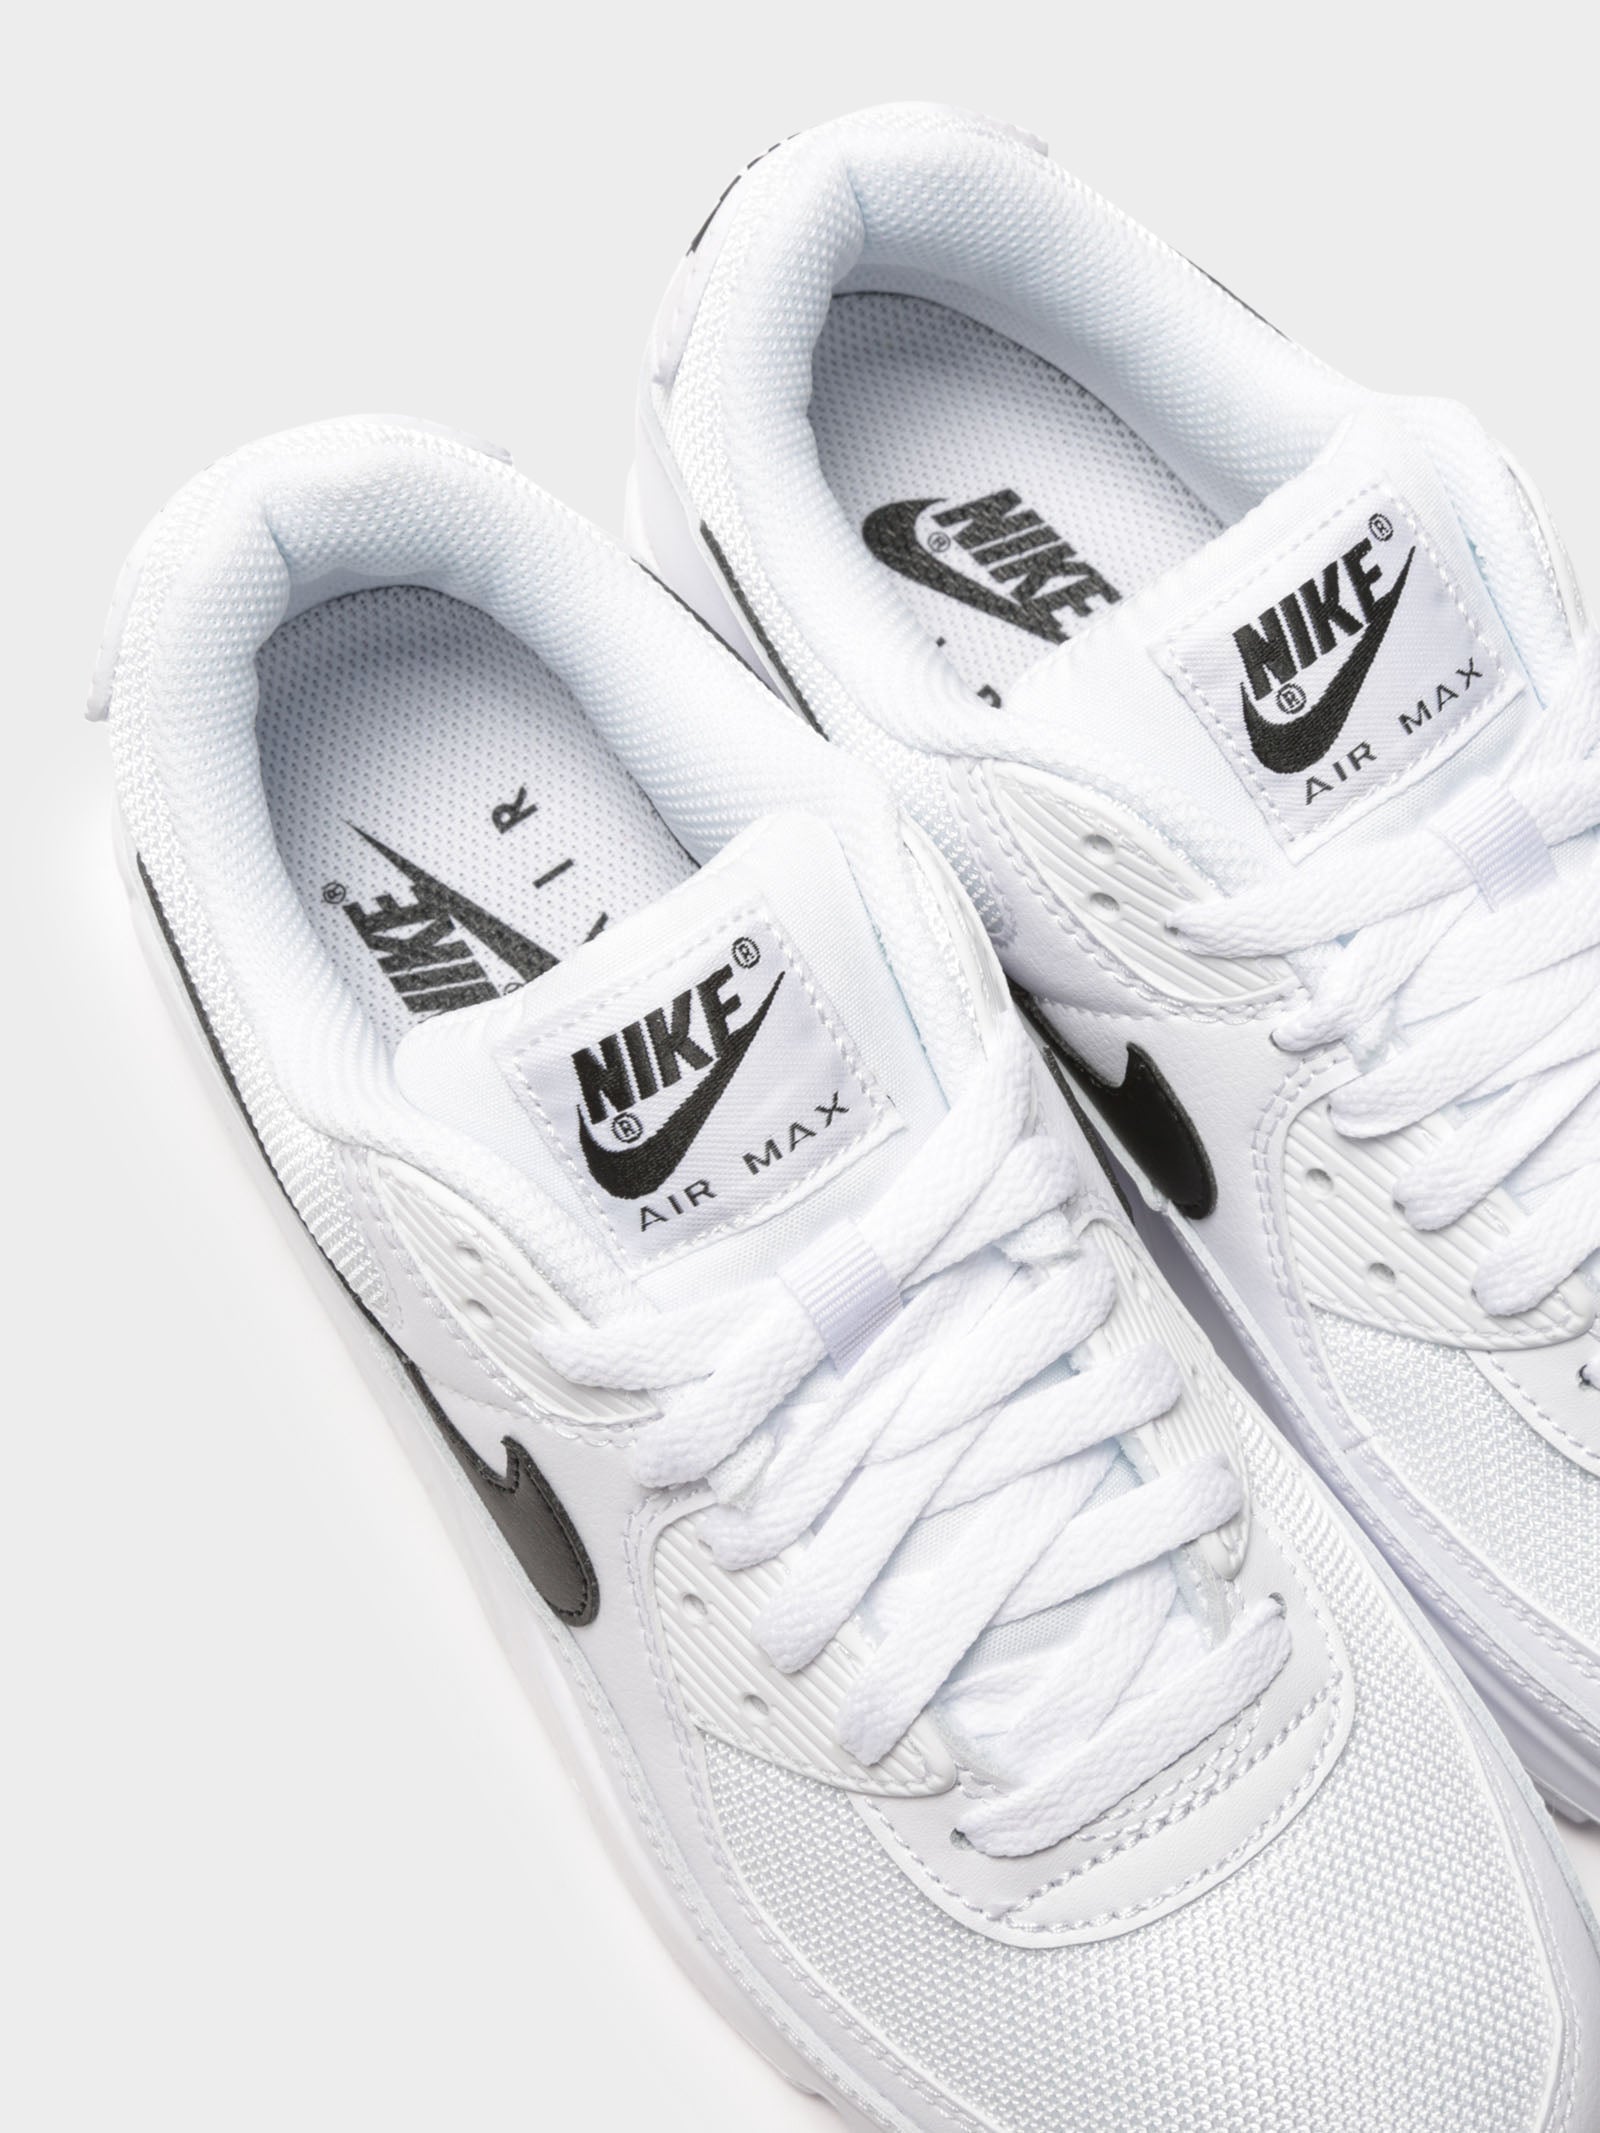 Womens Air Max 90 Sneakers in White & Black